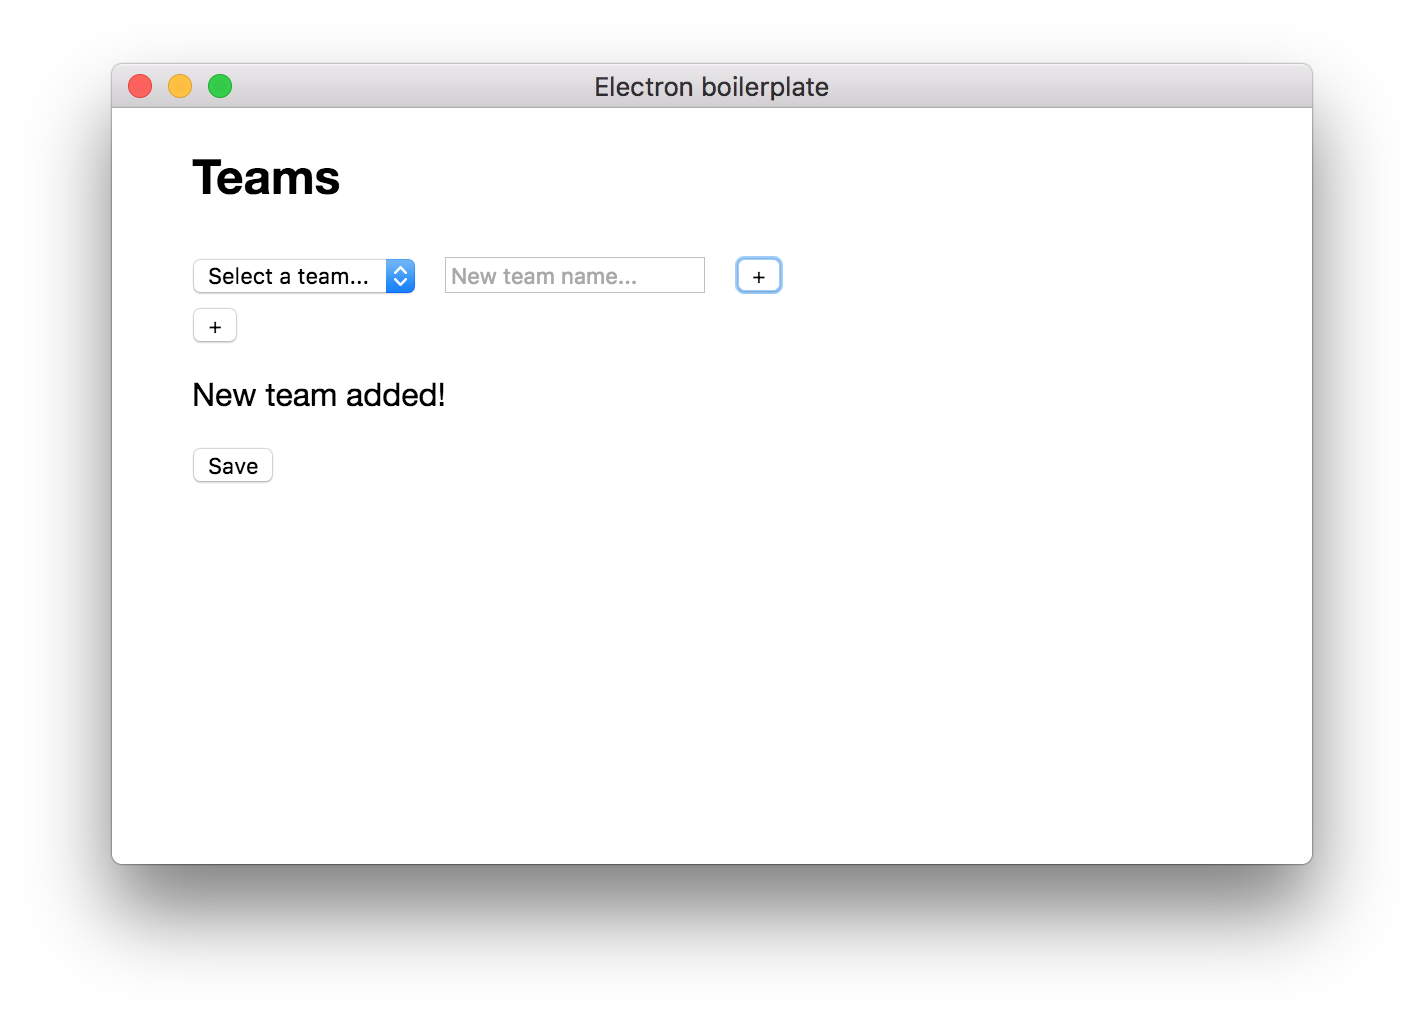 The 'New team added!' success message